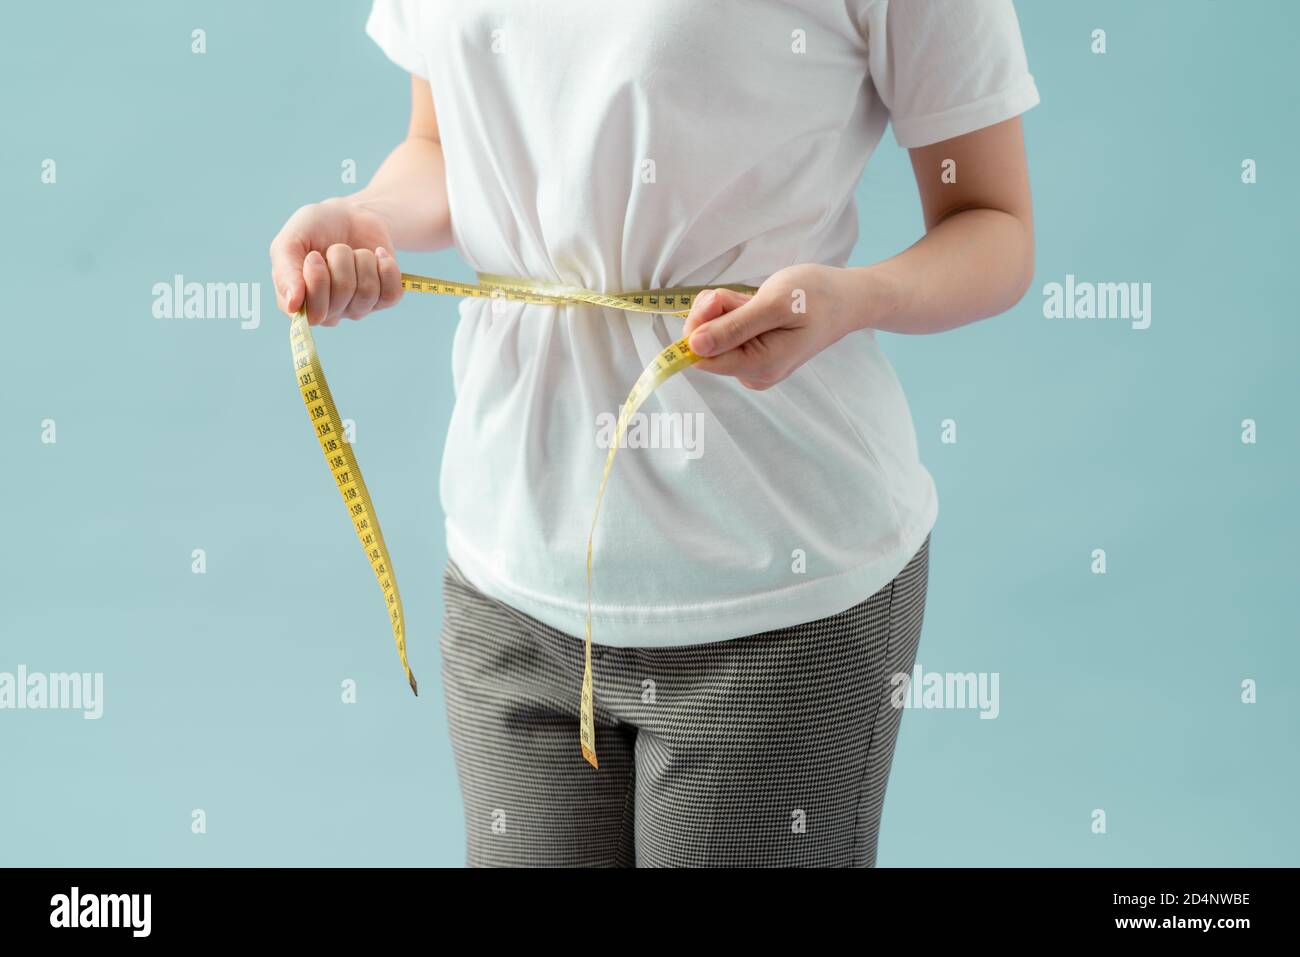 Weight loss, slim body, healthy lifestyle concept. Fit fitness girl measuring her waistline with measure tape on blue Stock Photo